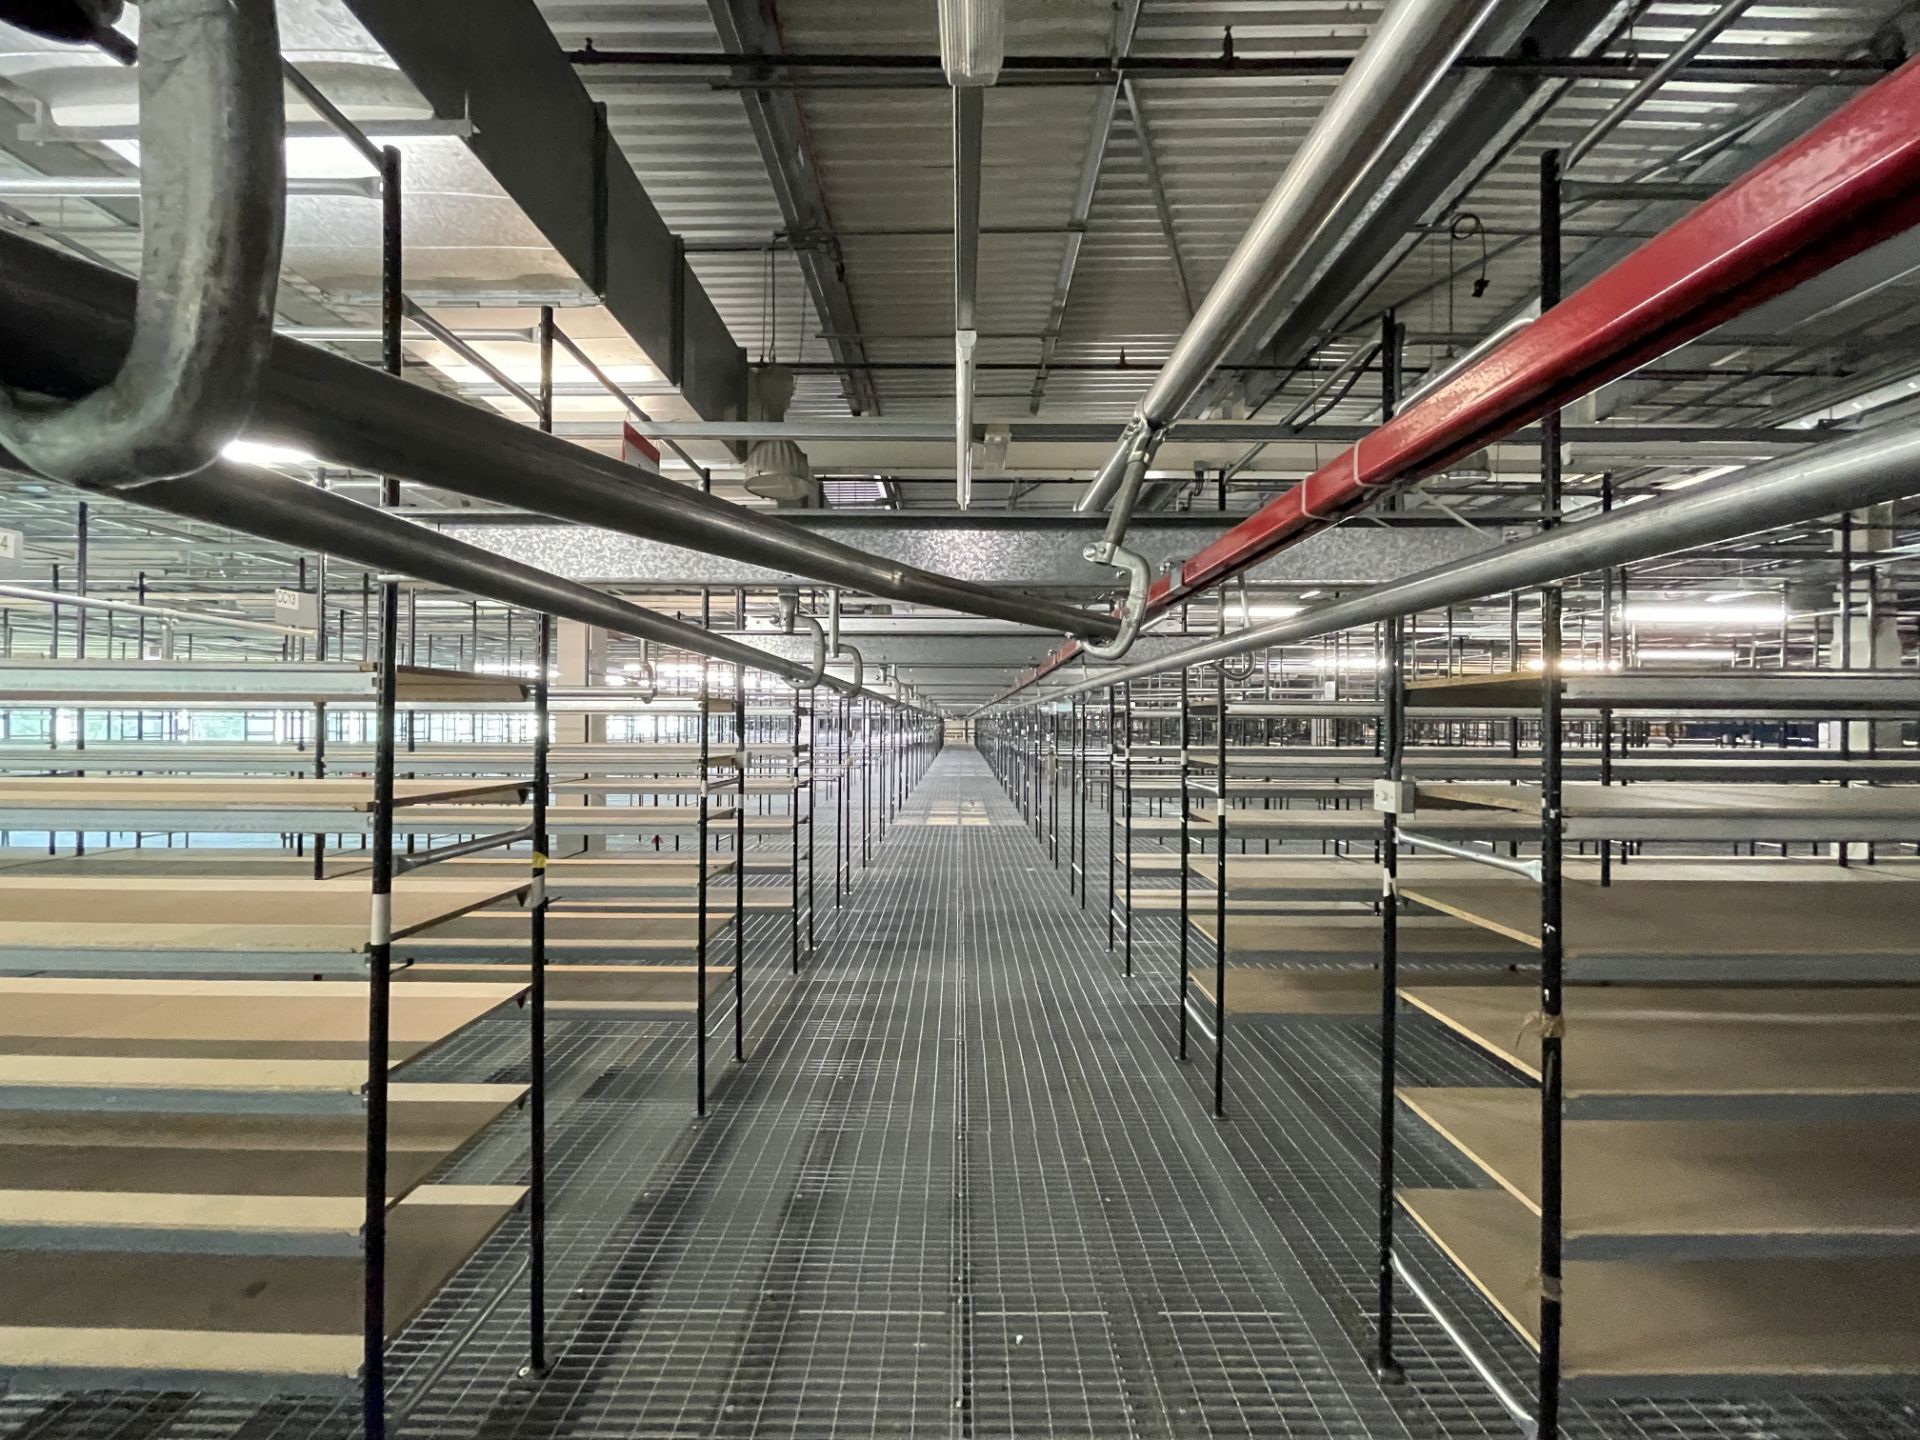 BOLTLESS STEEL SUSPENDED GARMENT STORAGE RACKING (on top of mezzanine floor), comprising approx. - Image 5 of 9